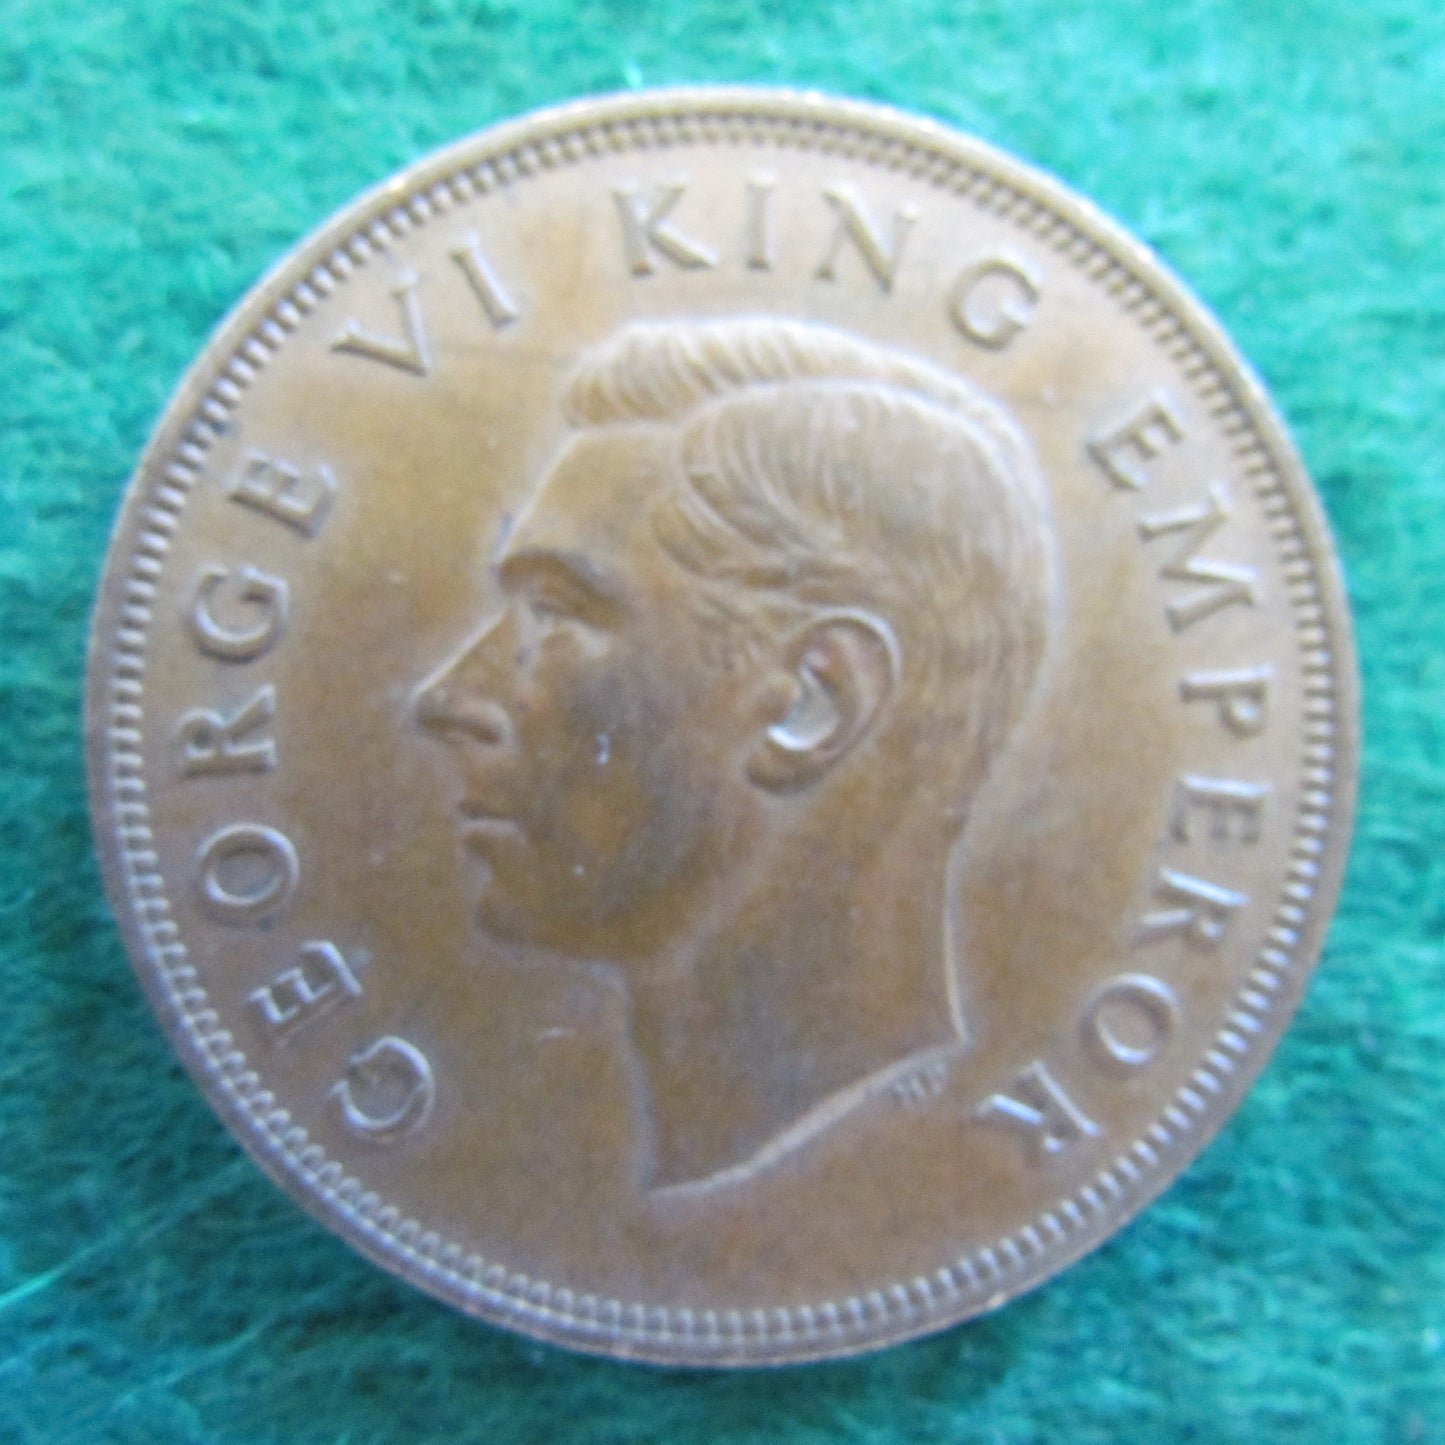 New Zealand 1944 Penny King George VI Coin